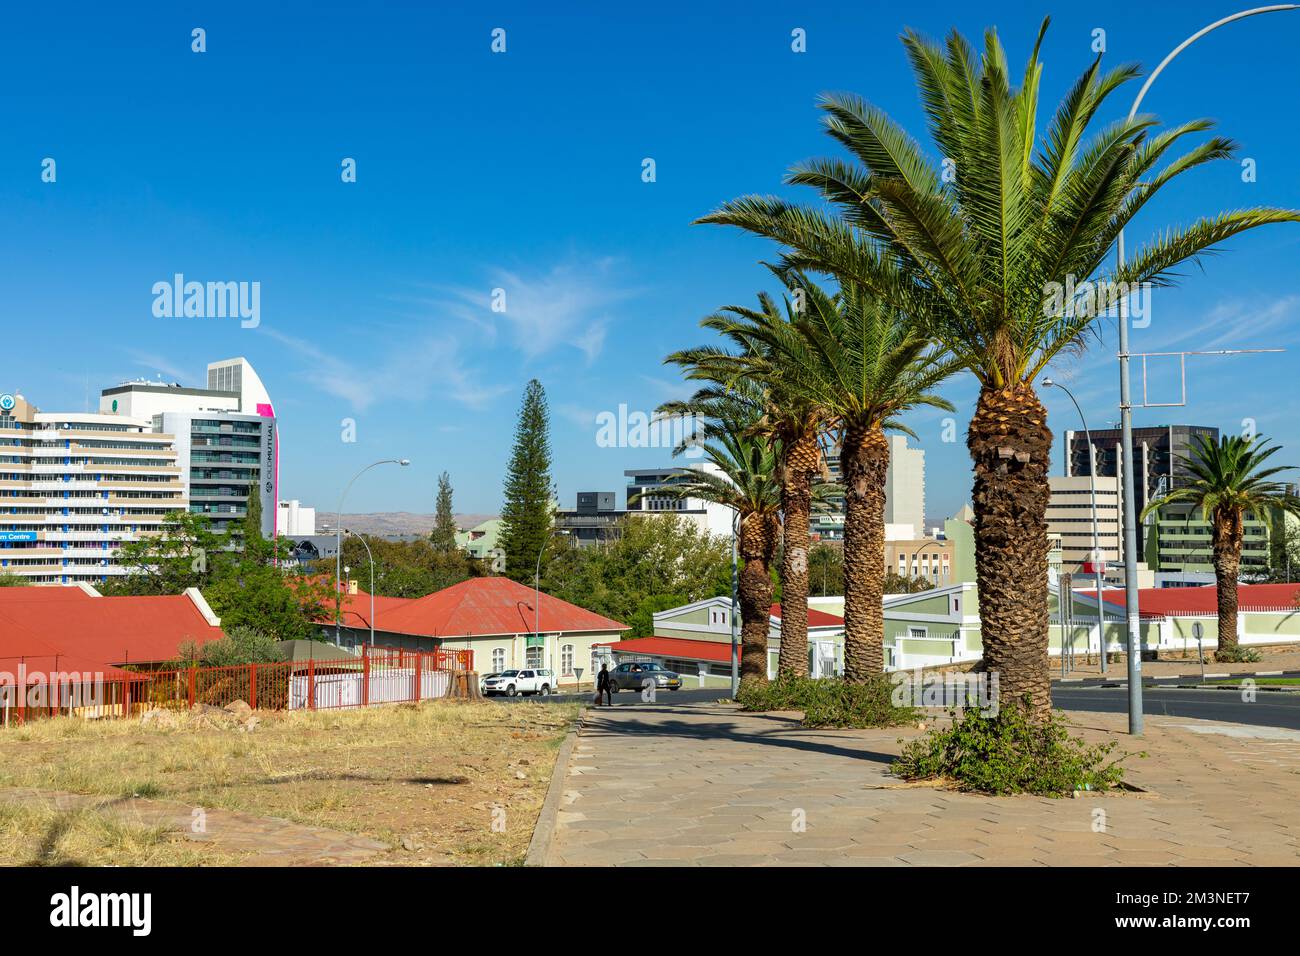 City Center of Windhoek. Windhoek is the capital and the largest city of Namibia. Southern Africa. Stock Photo